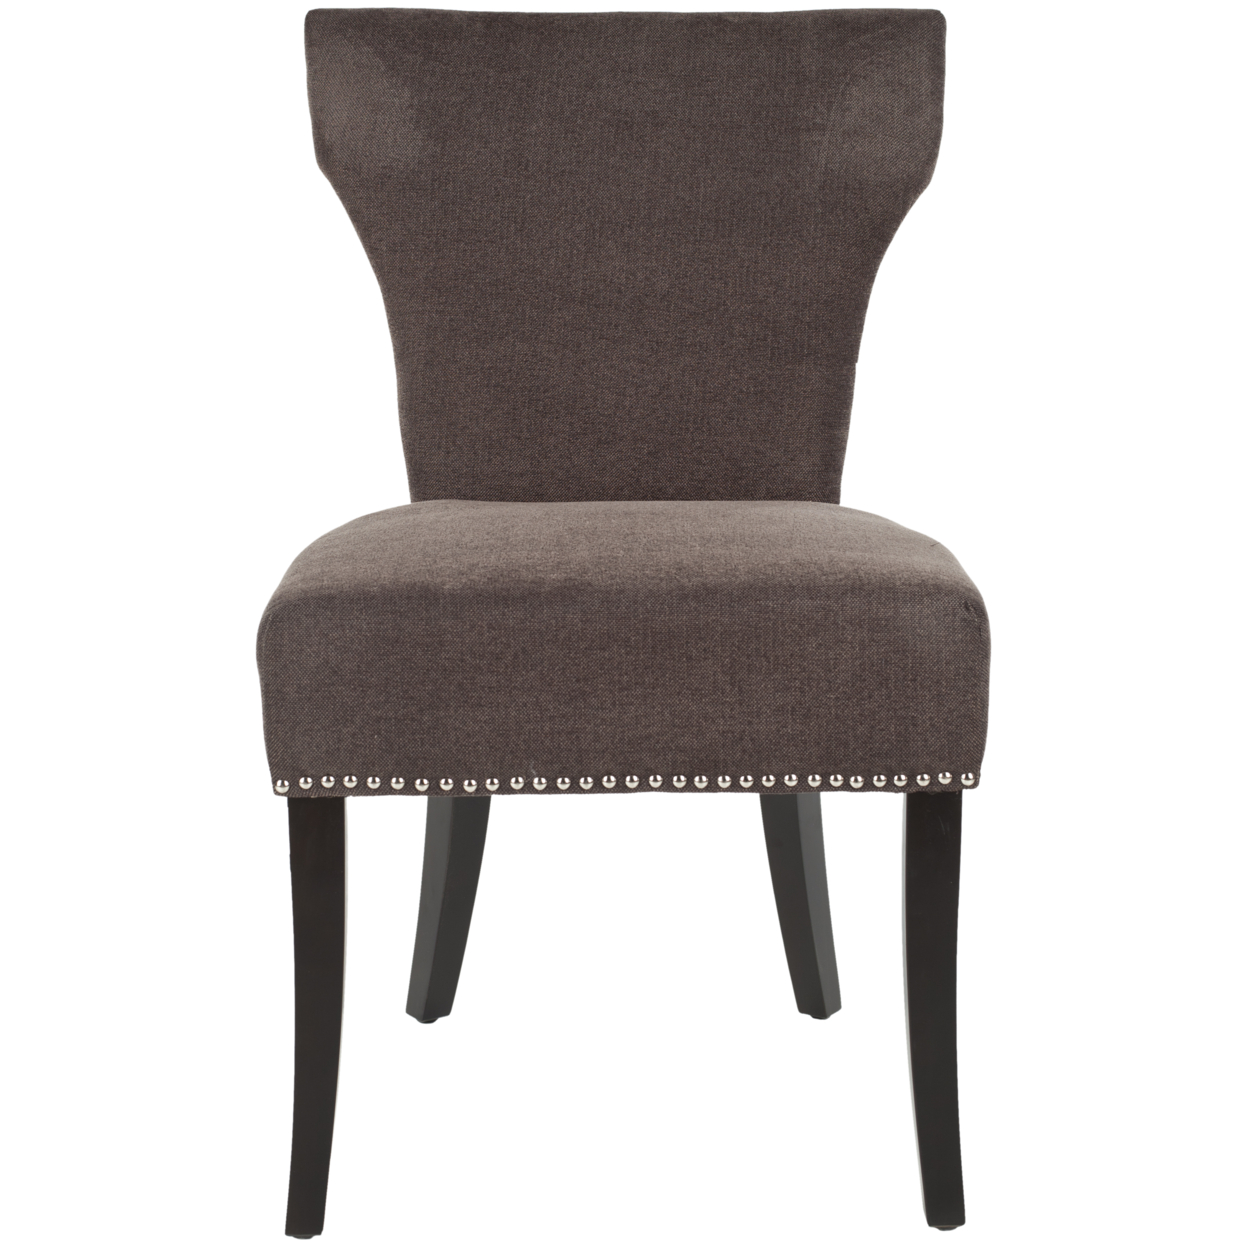 SAFAVIEH Jappic 22''H KD Side Chair Set Of 2 Silver Nail Head Bark / Espresso